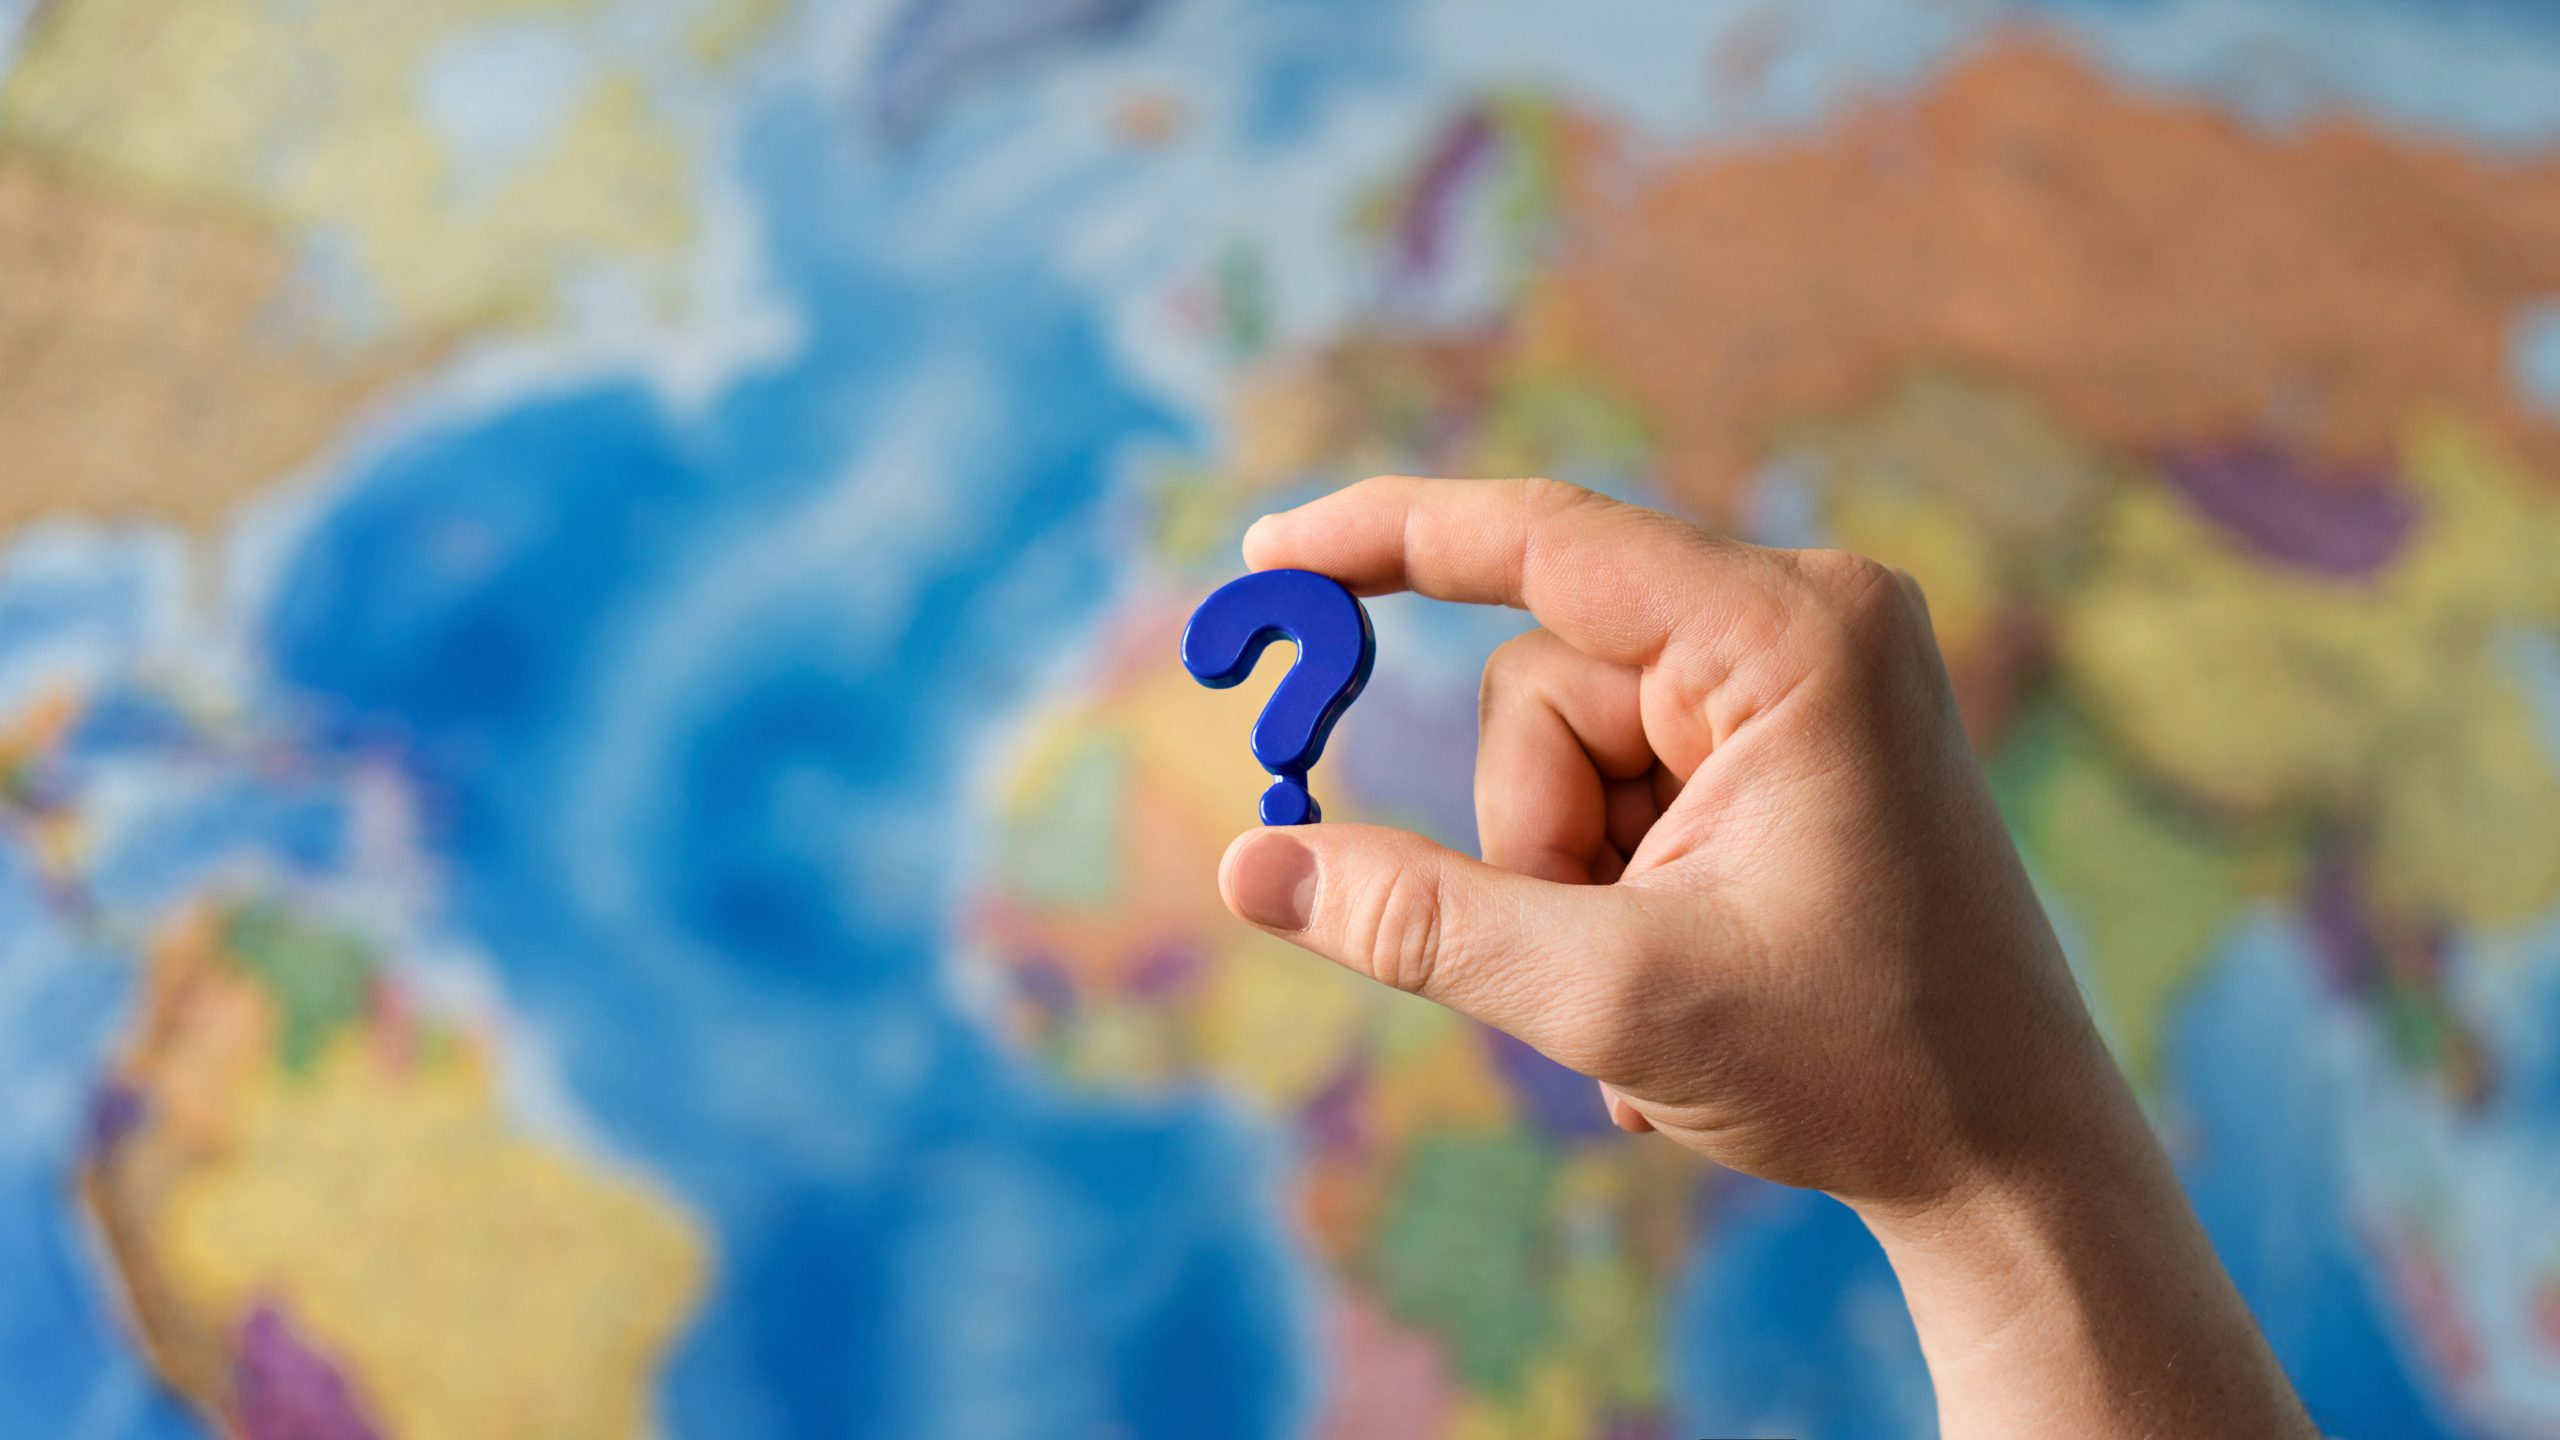 Adult hand holding question mark plastic toy on the world political map background.